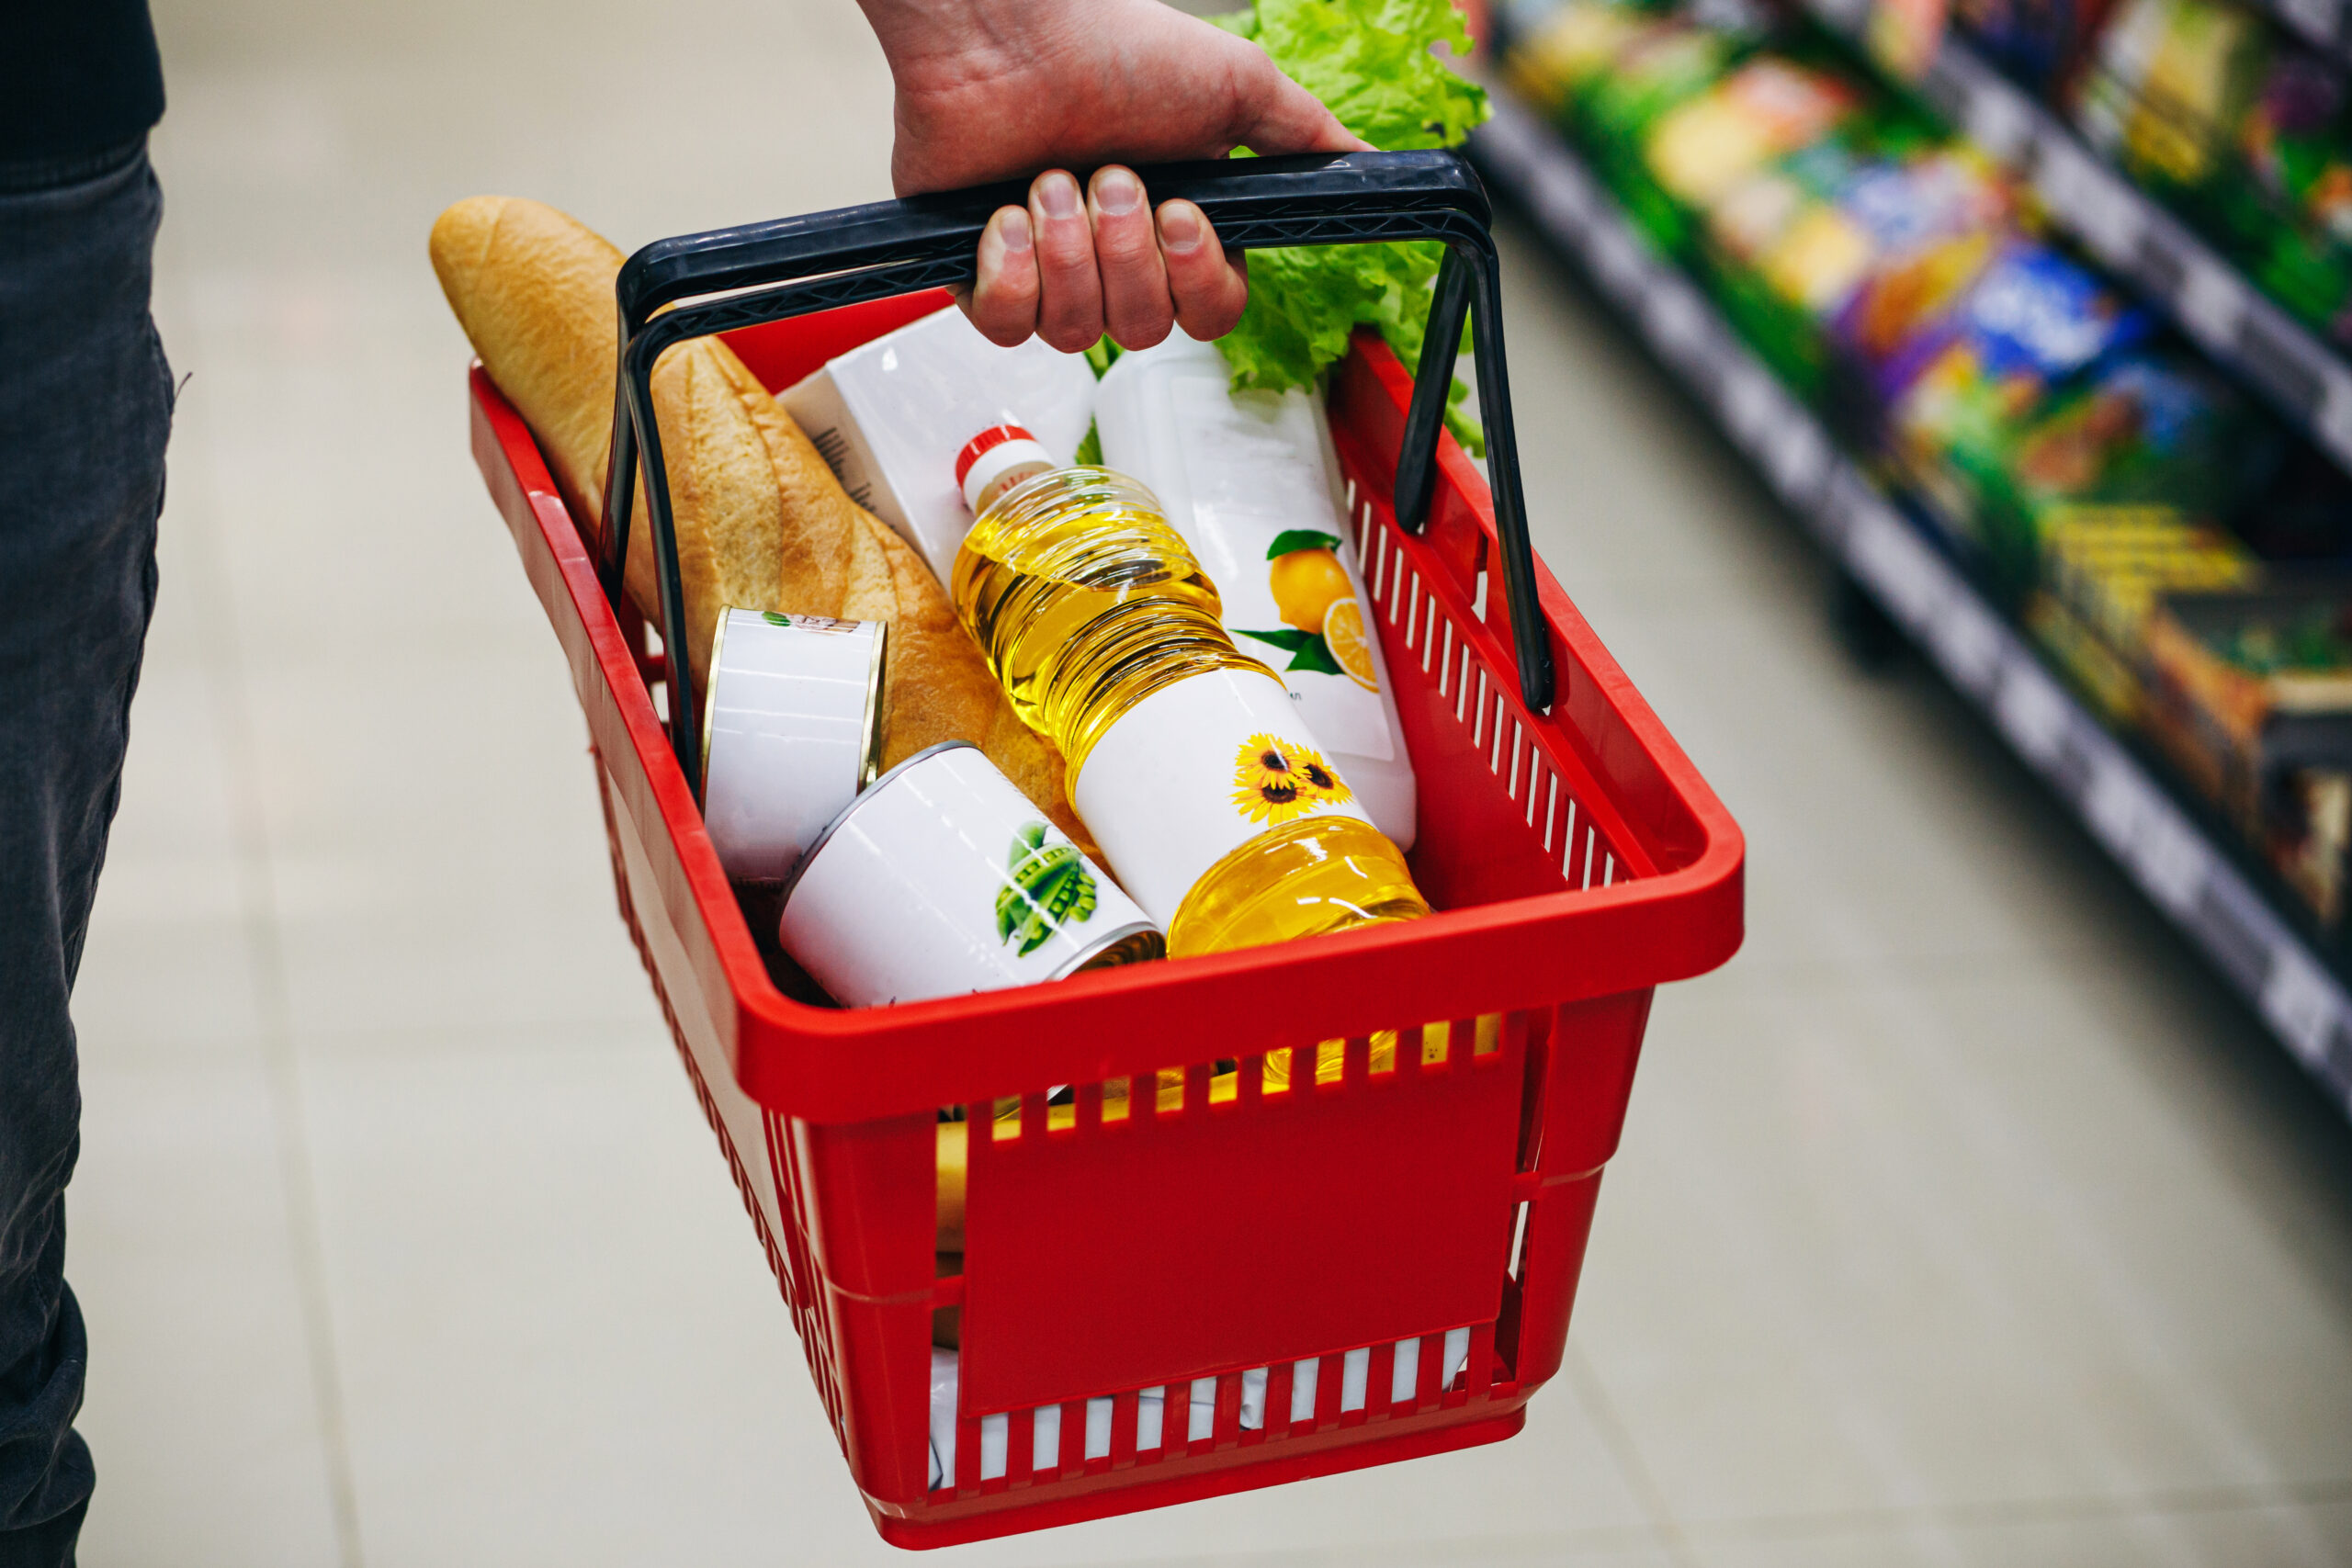 Filling the Basket: The Power of Cross-Category Purchasing